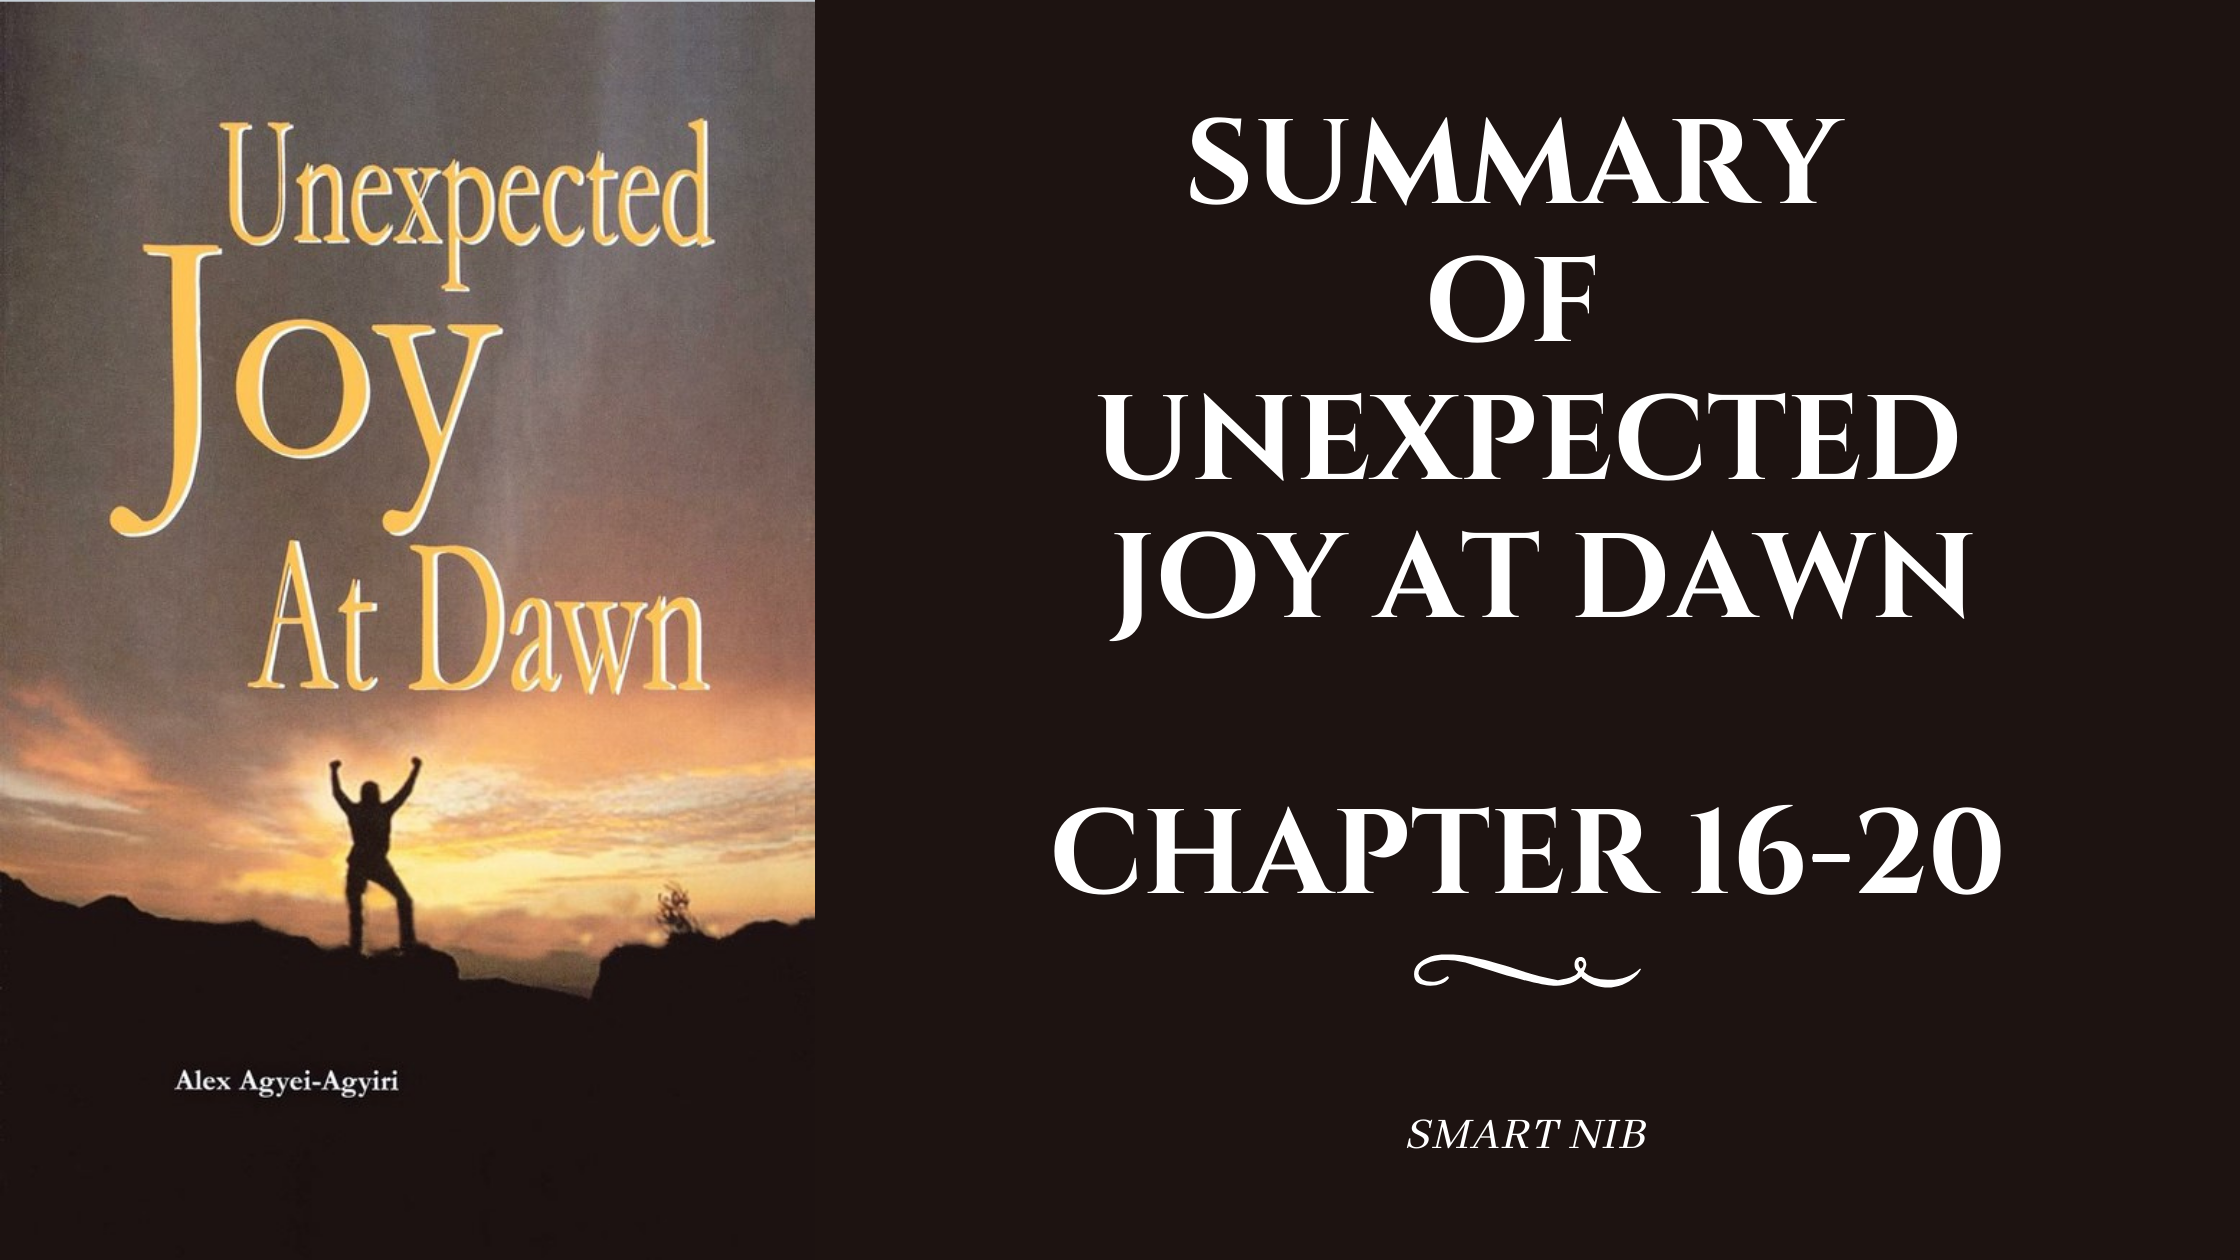 Summary of Unexpected Joy at Dawn Chapter 16-20